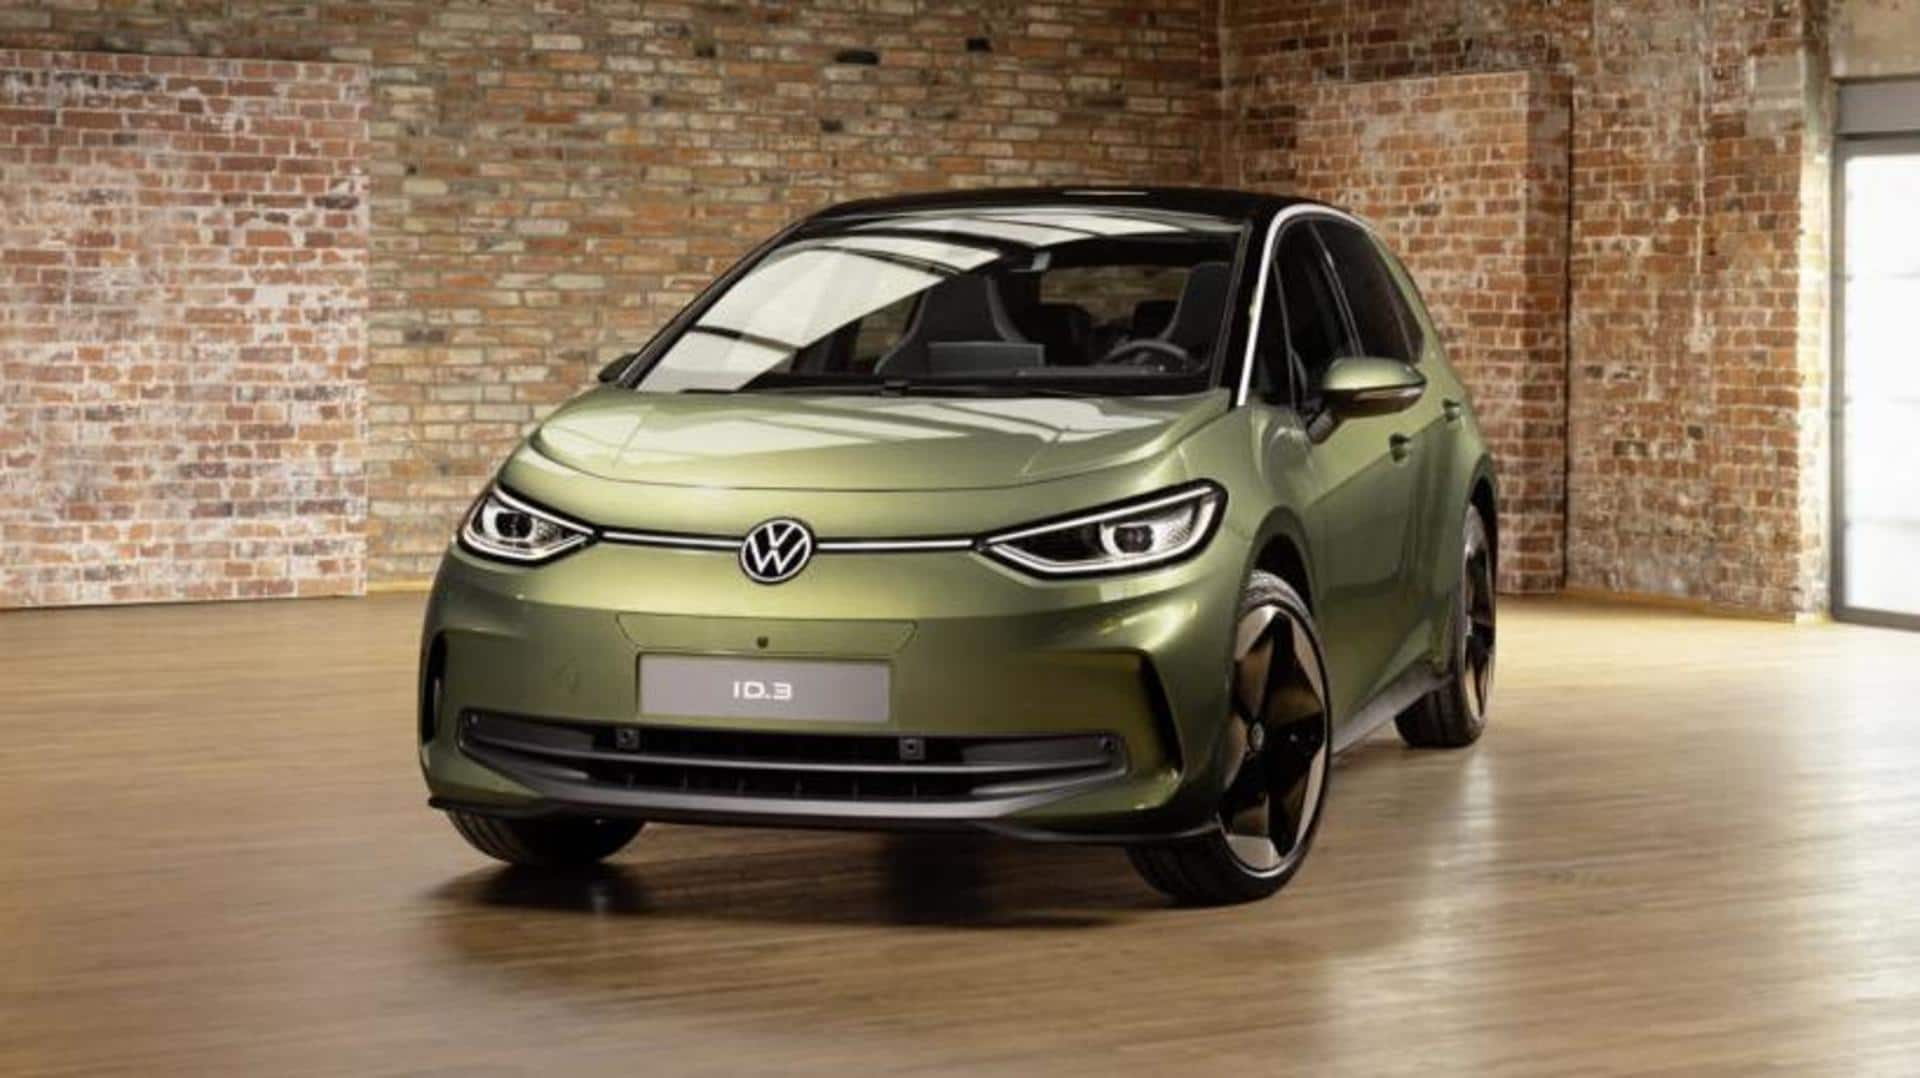 2024 Volkswagen ID.3 electric car goes official: Check features